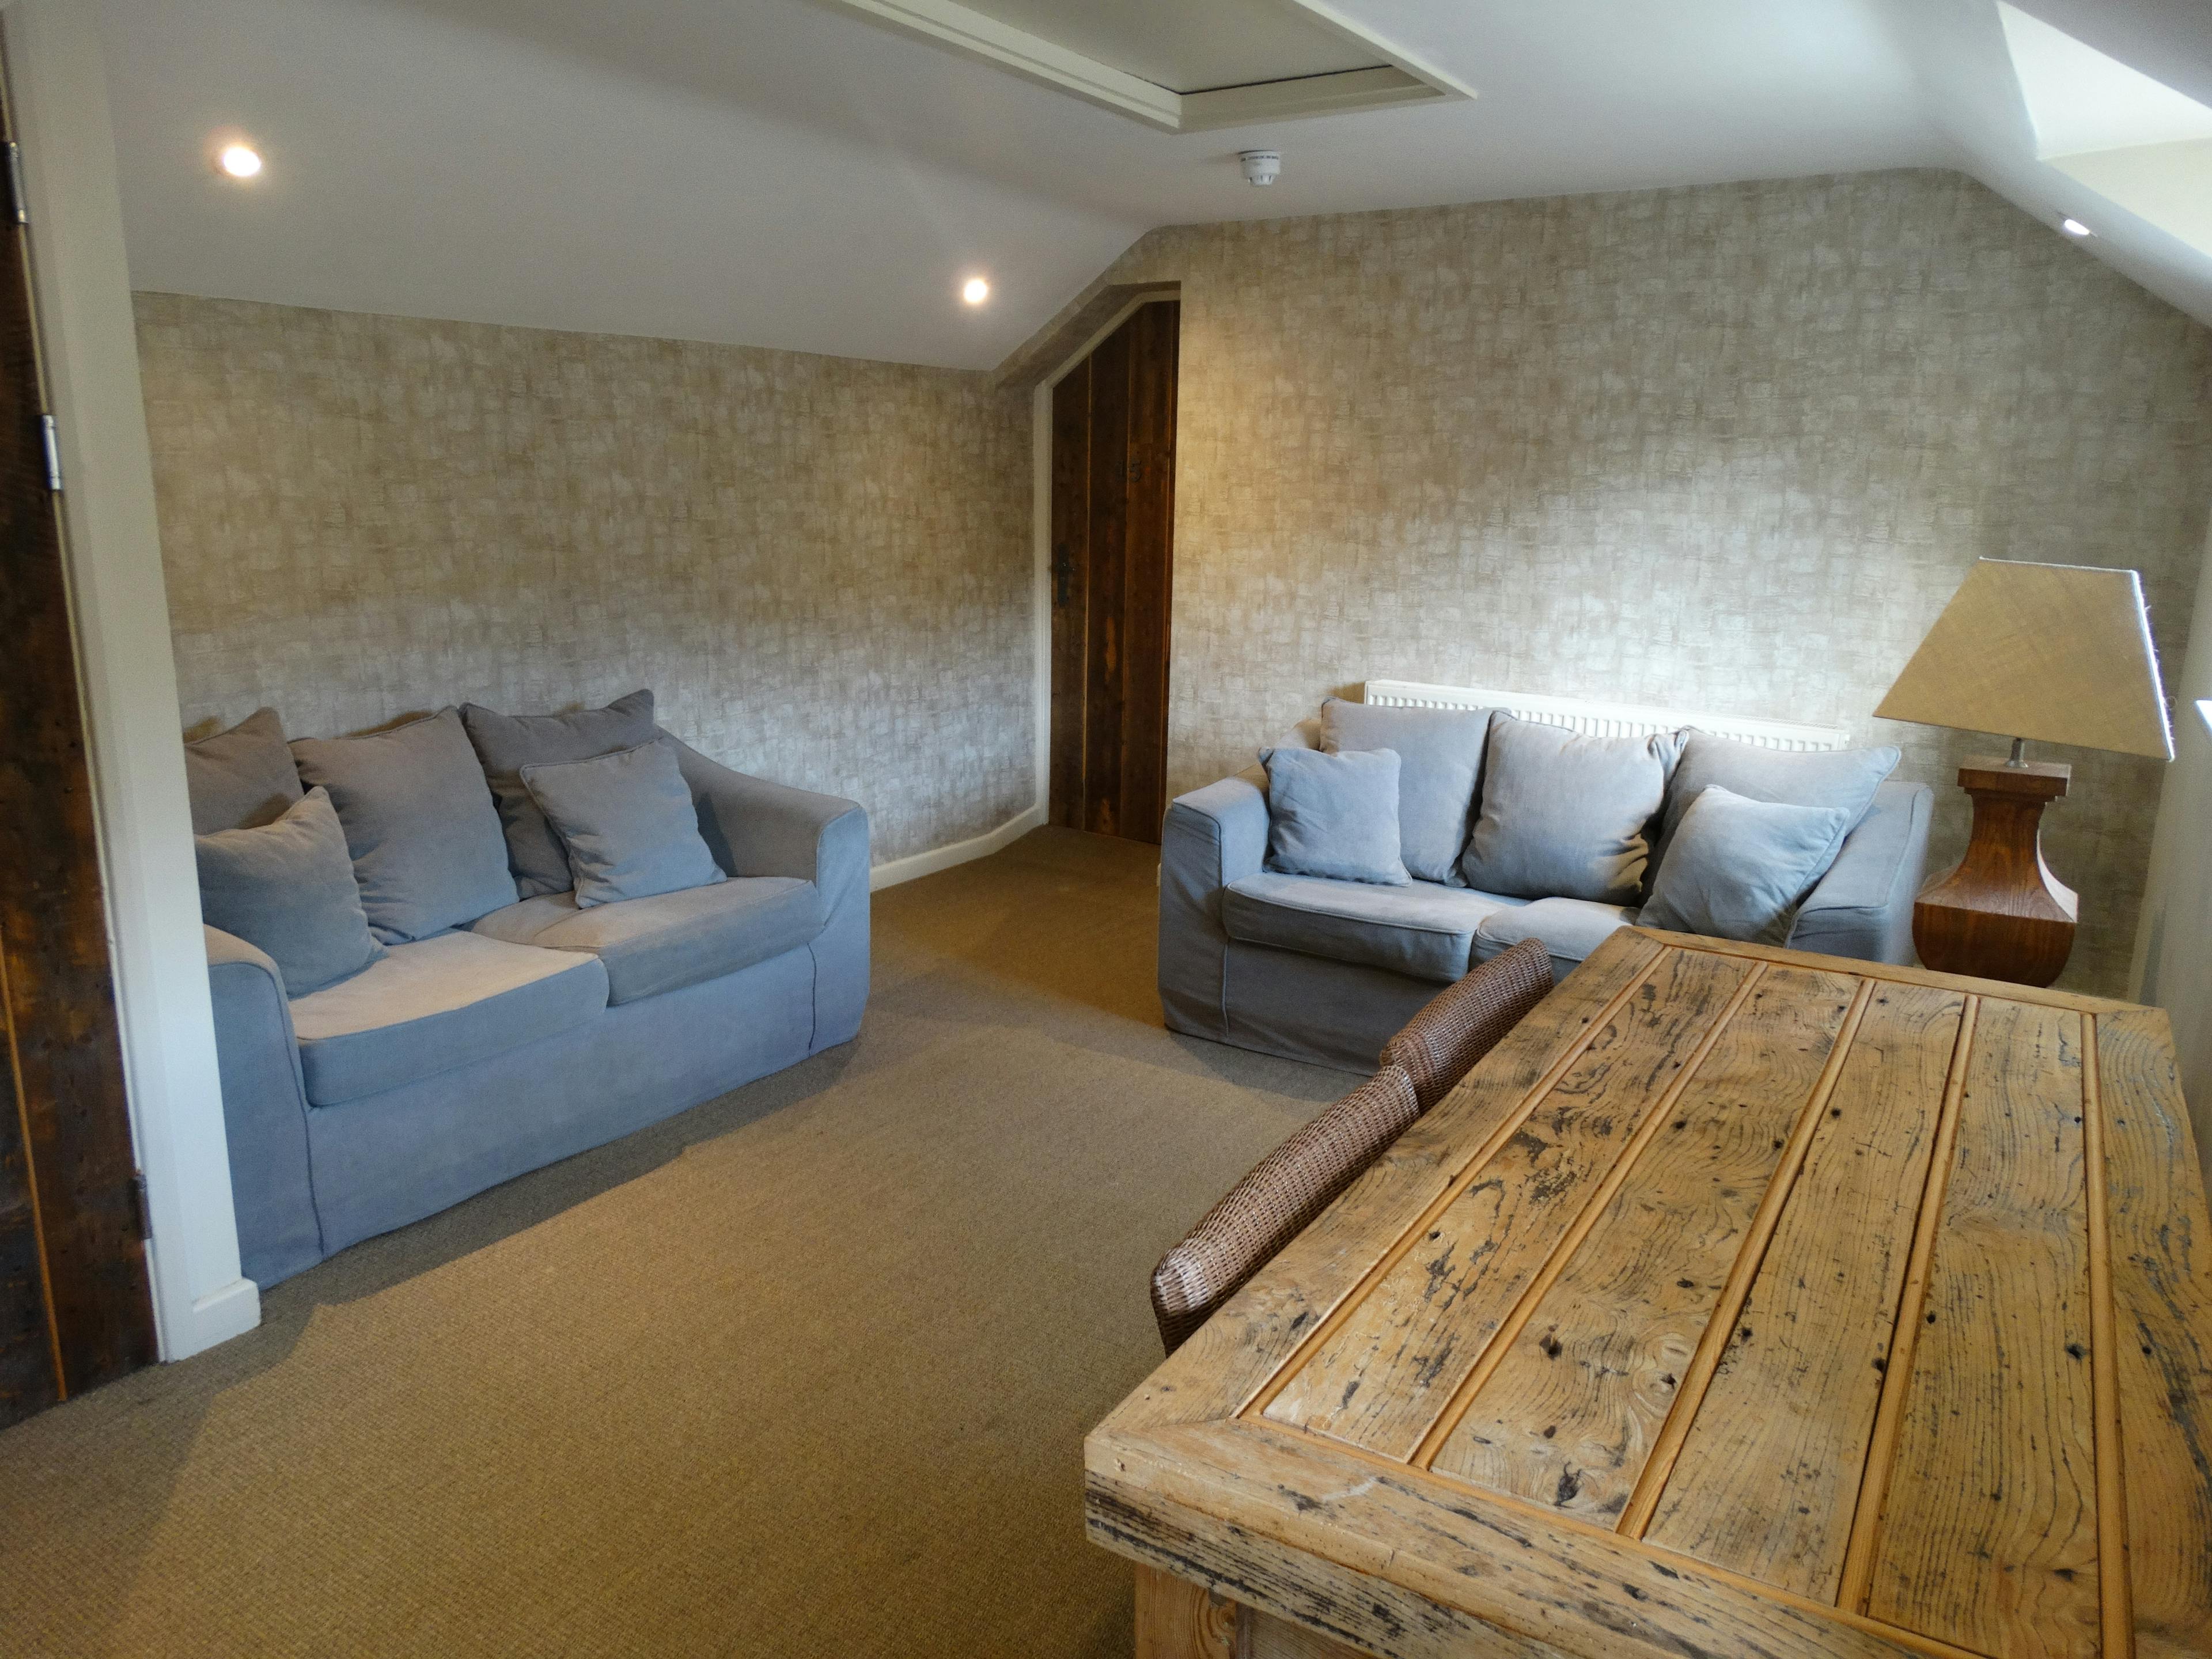 Relax in our self-catering accommodation